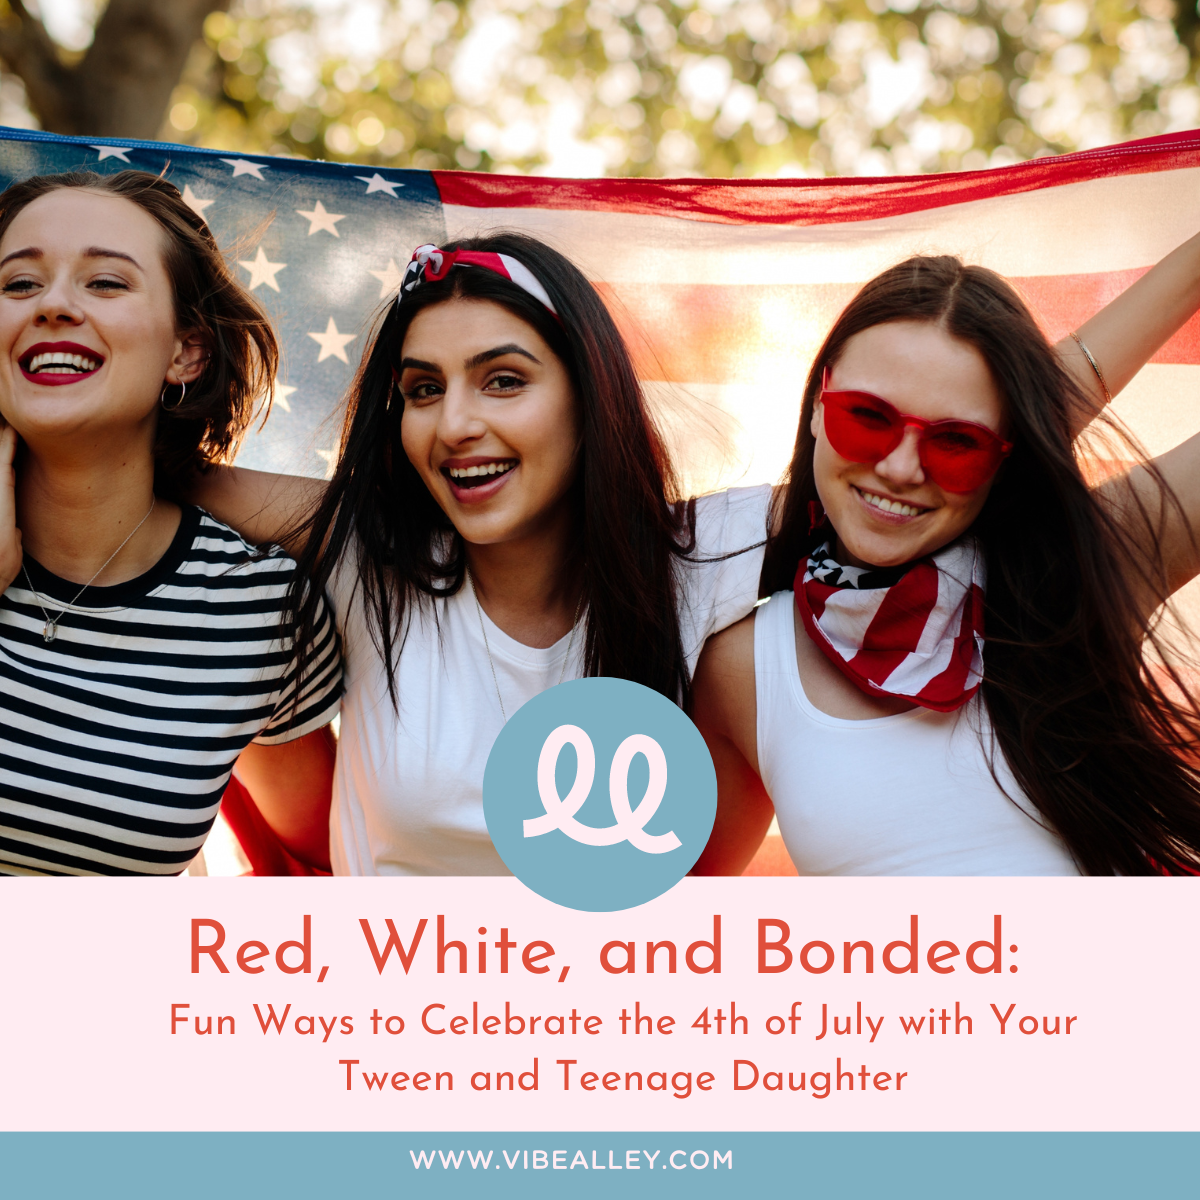 Red, White, and Bonded: Fun Ways to Celebrate the 4th of July with Your Tween and Teenage Daughter